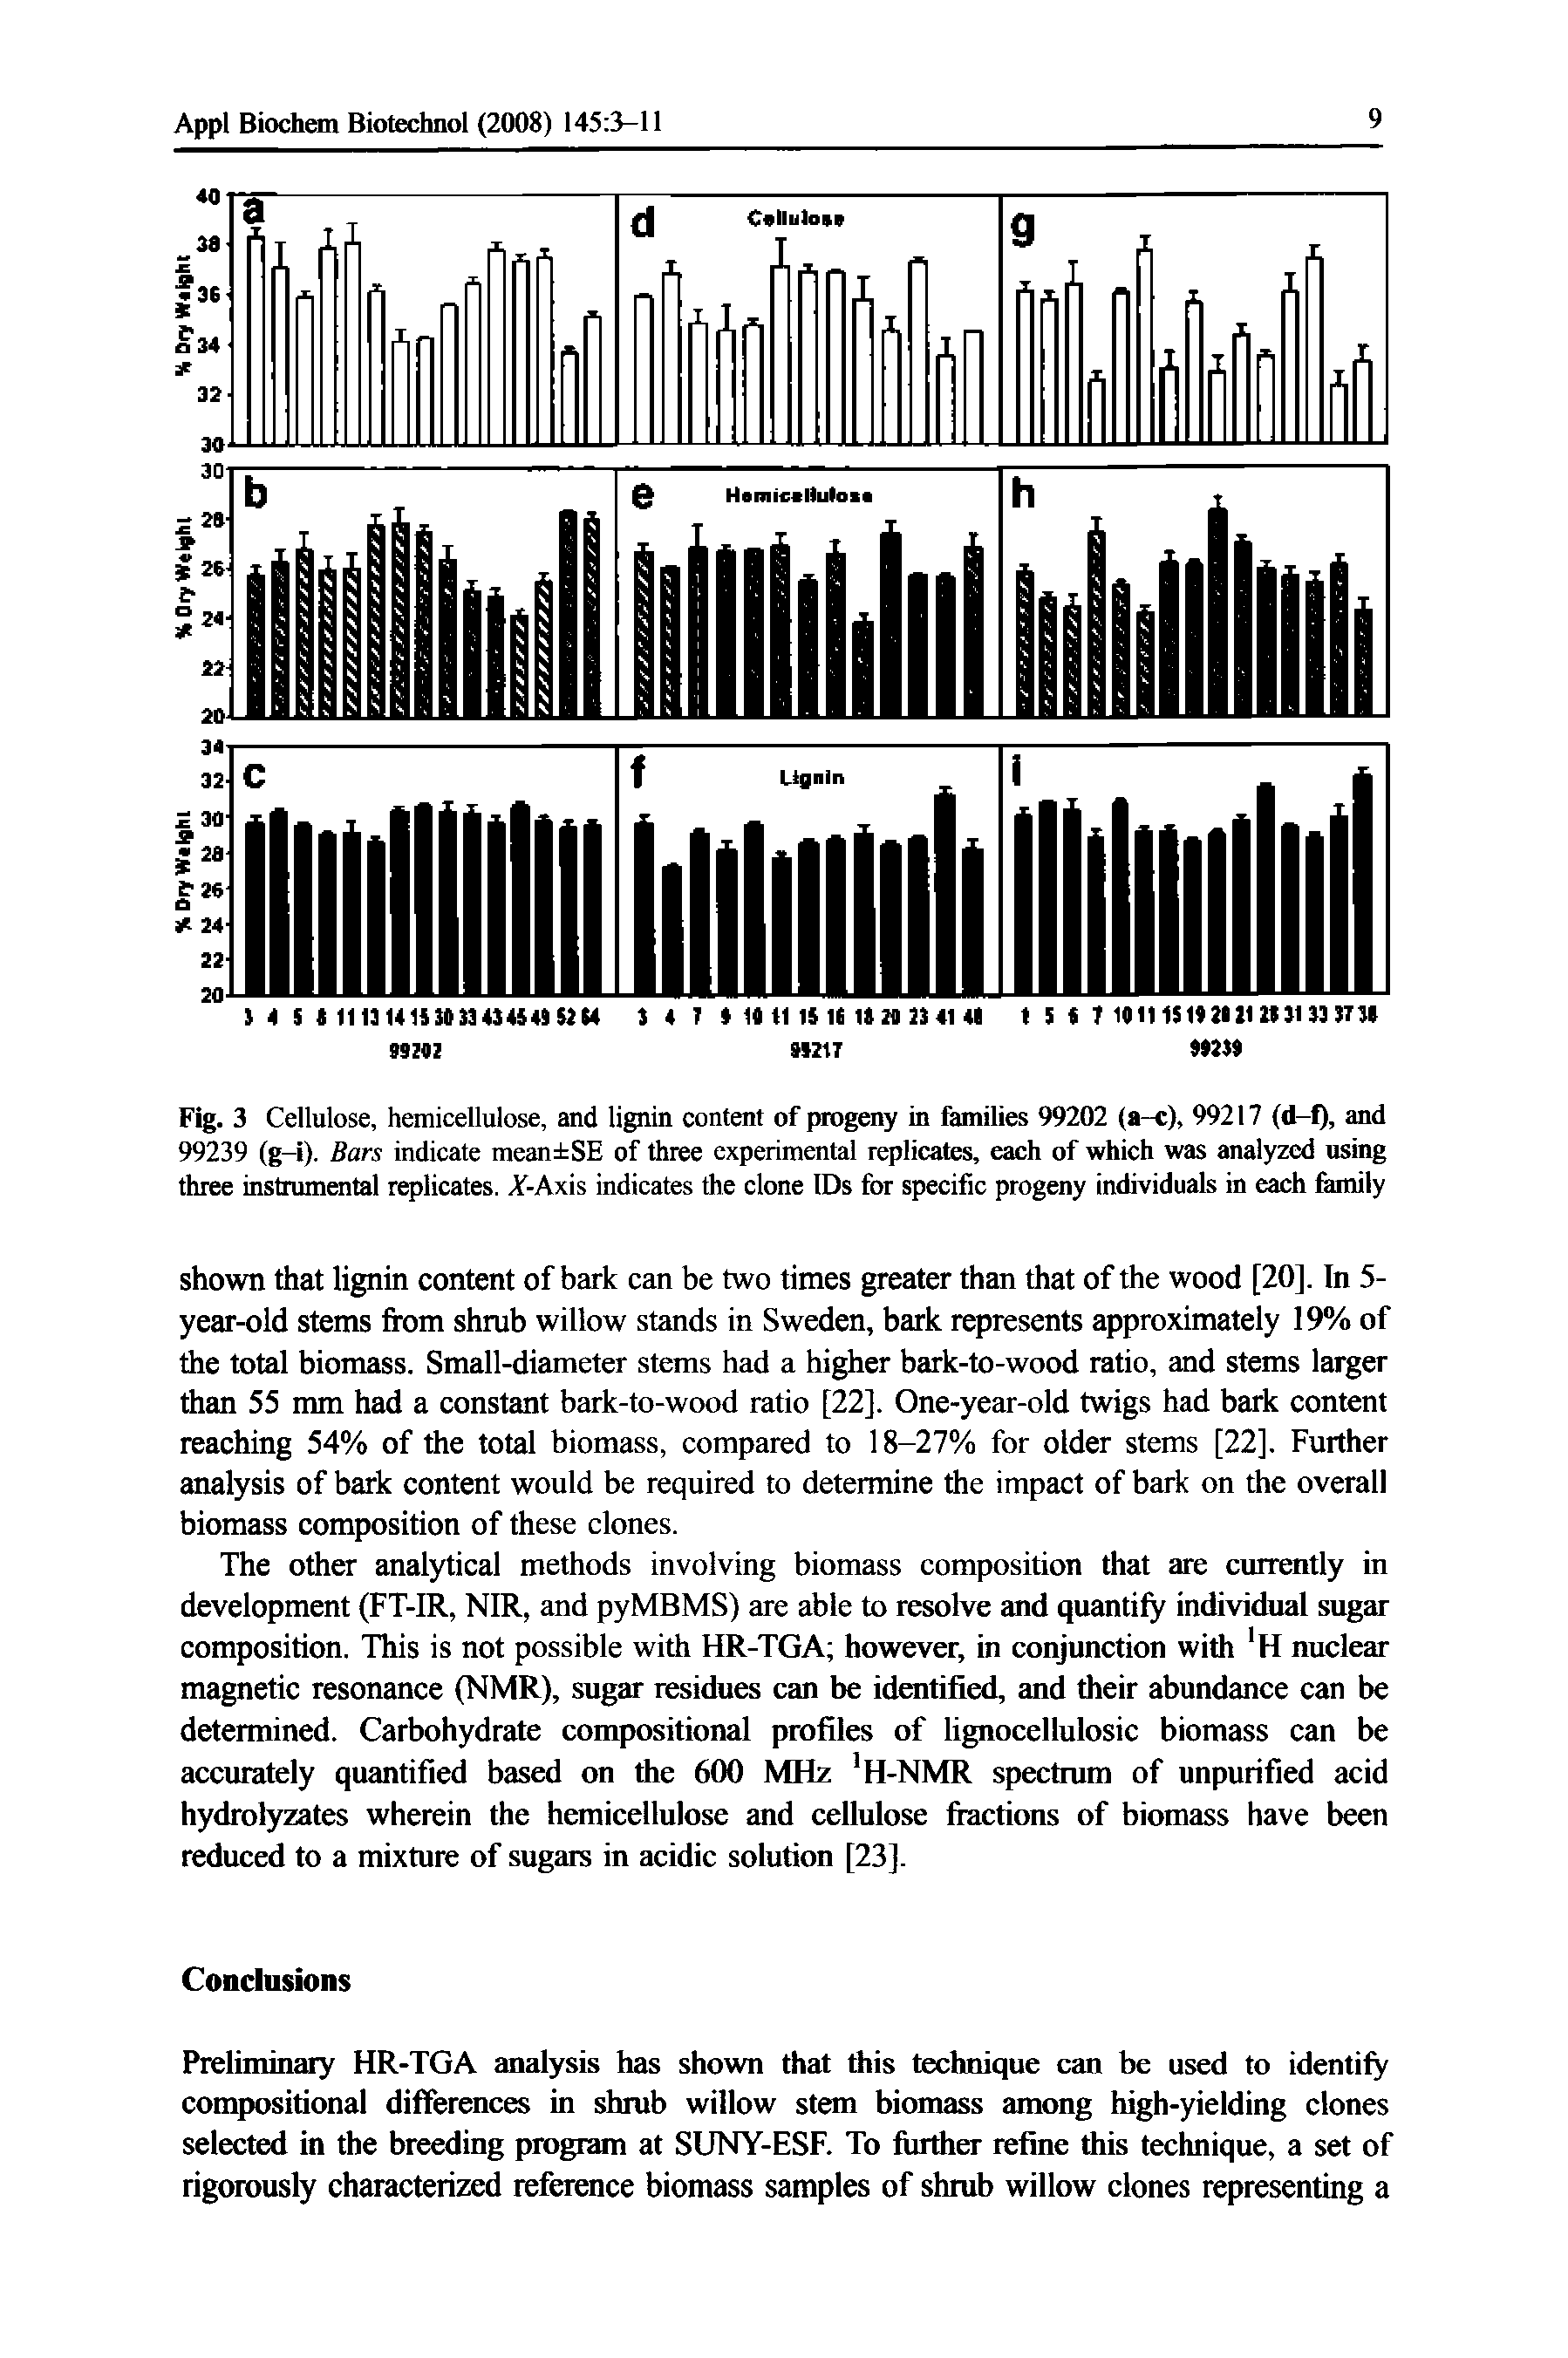 Fig. 3 Cellulose, hemicellulose, and lignin content of progeny in families 99202 (a-c), 99217 (d-l), and 99239 (g-i). Bars indicate mean SE of three experimental replicates, each of which was analyzed using three instrumental replicates. Jf-Axis indicates the clone IDs for specific progeny individuals in each lanuly...